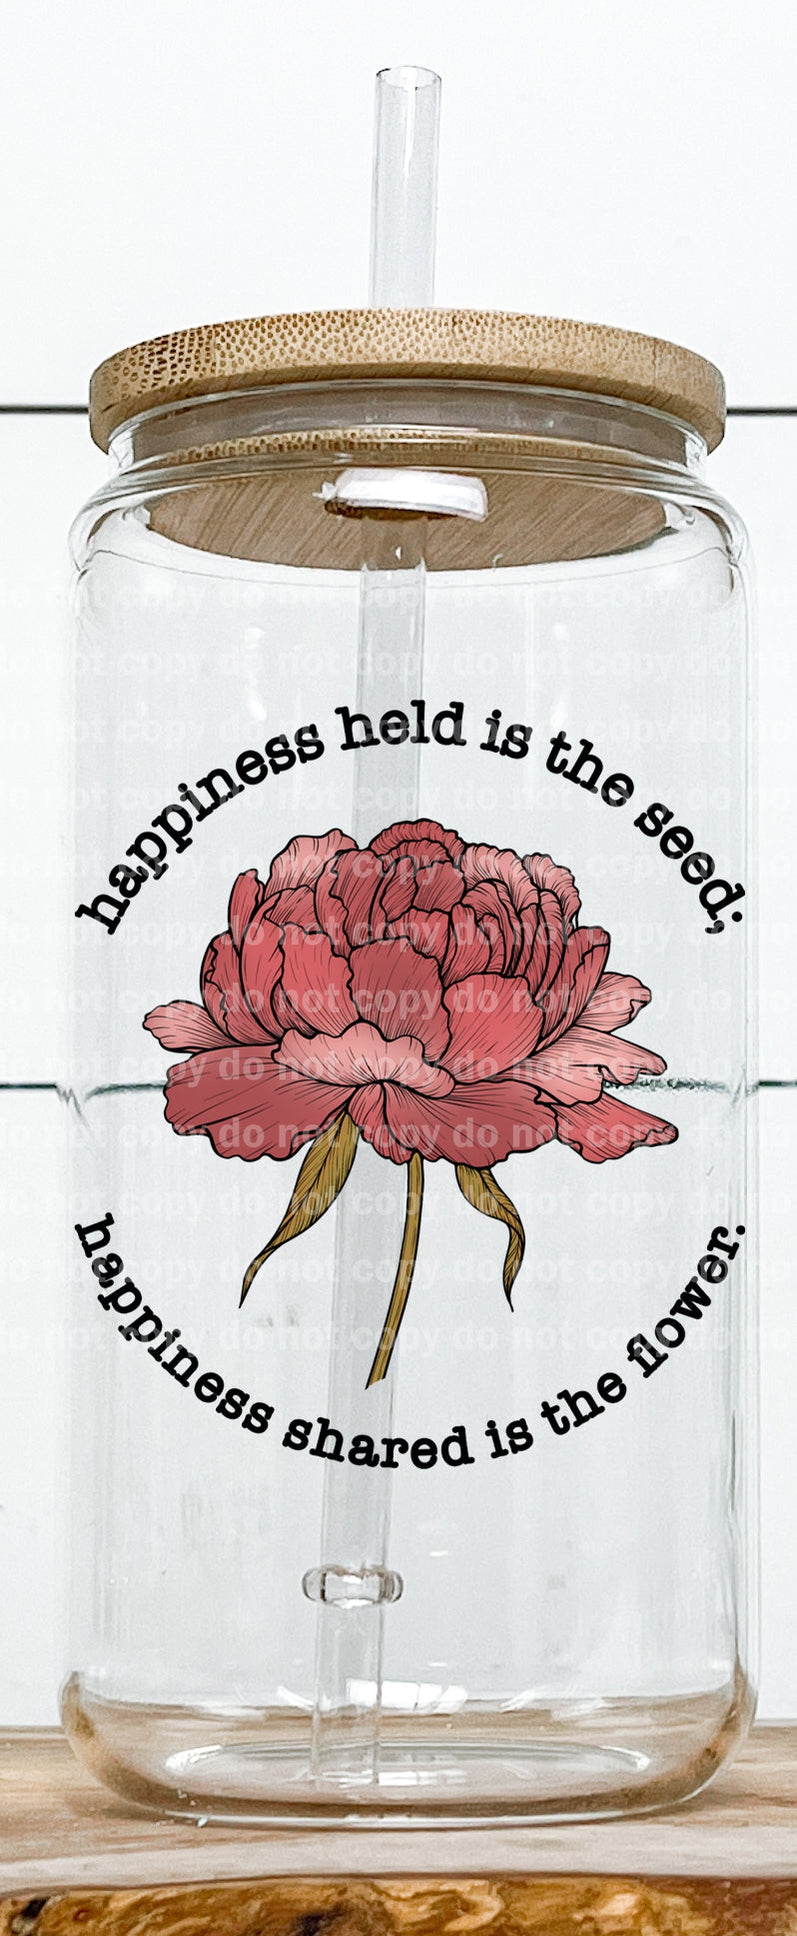 Happiness Held Is The Seed, Happiness Shared Is The Flower Decal 3.65 x 3.2